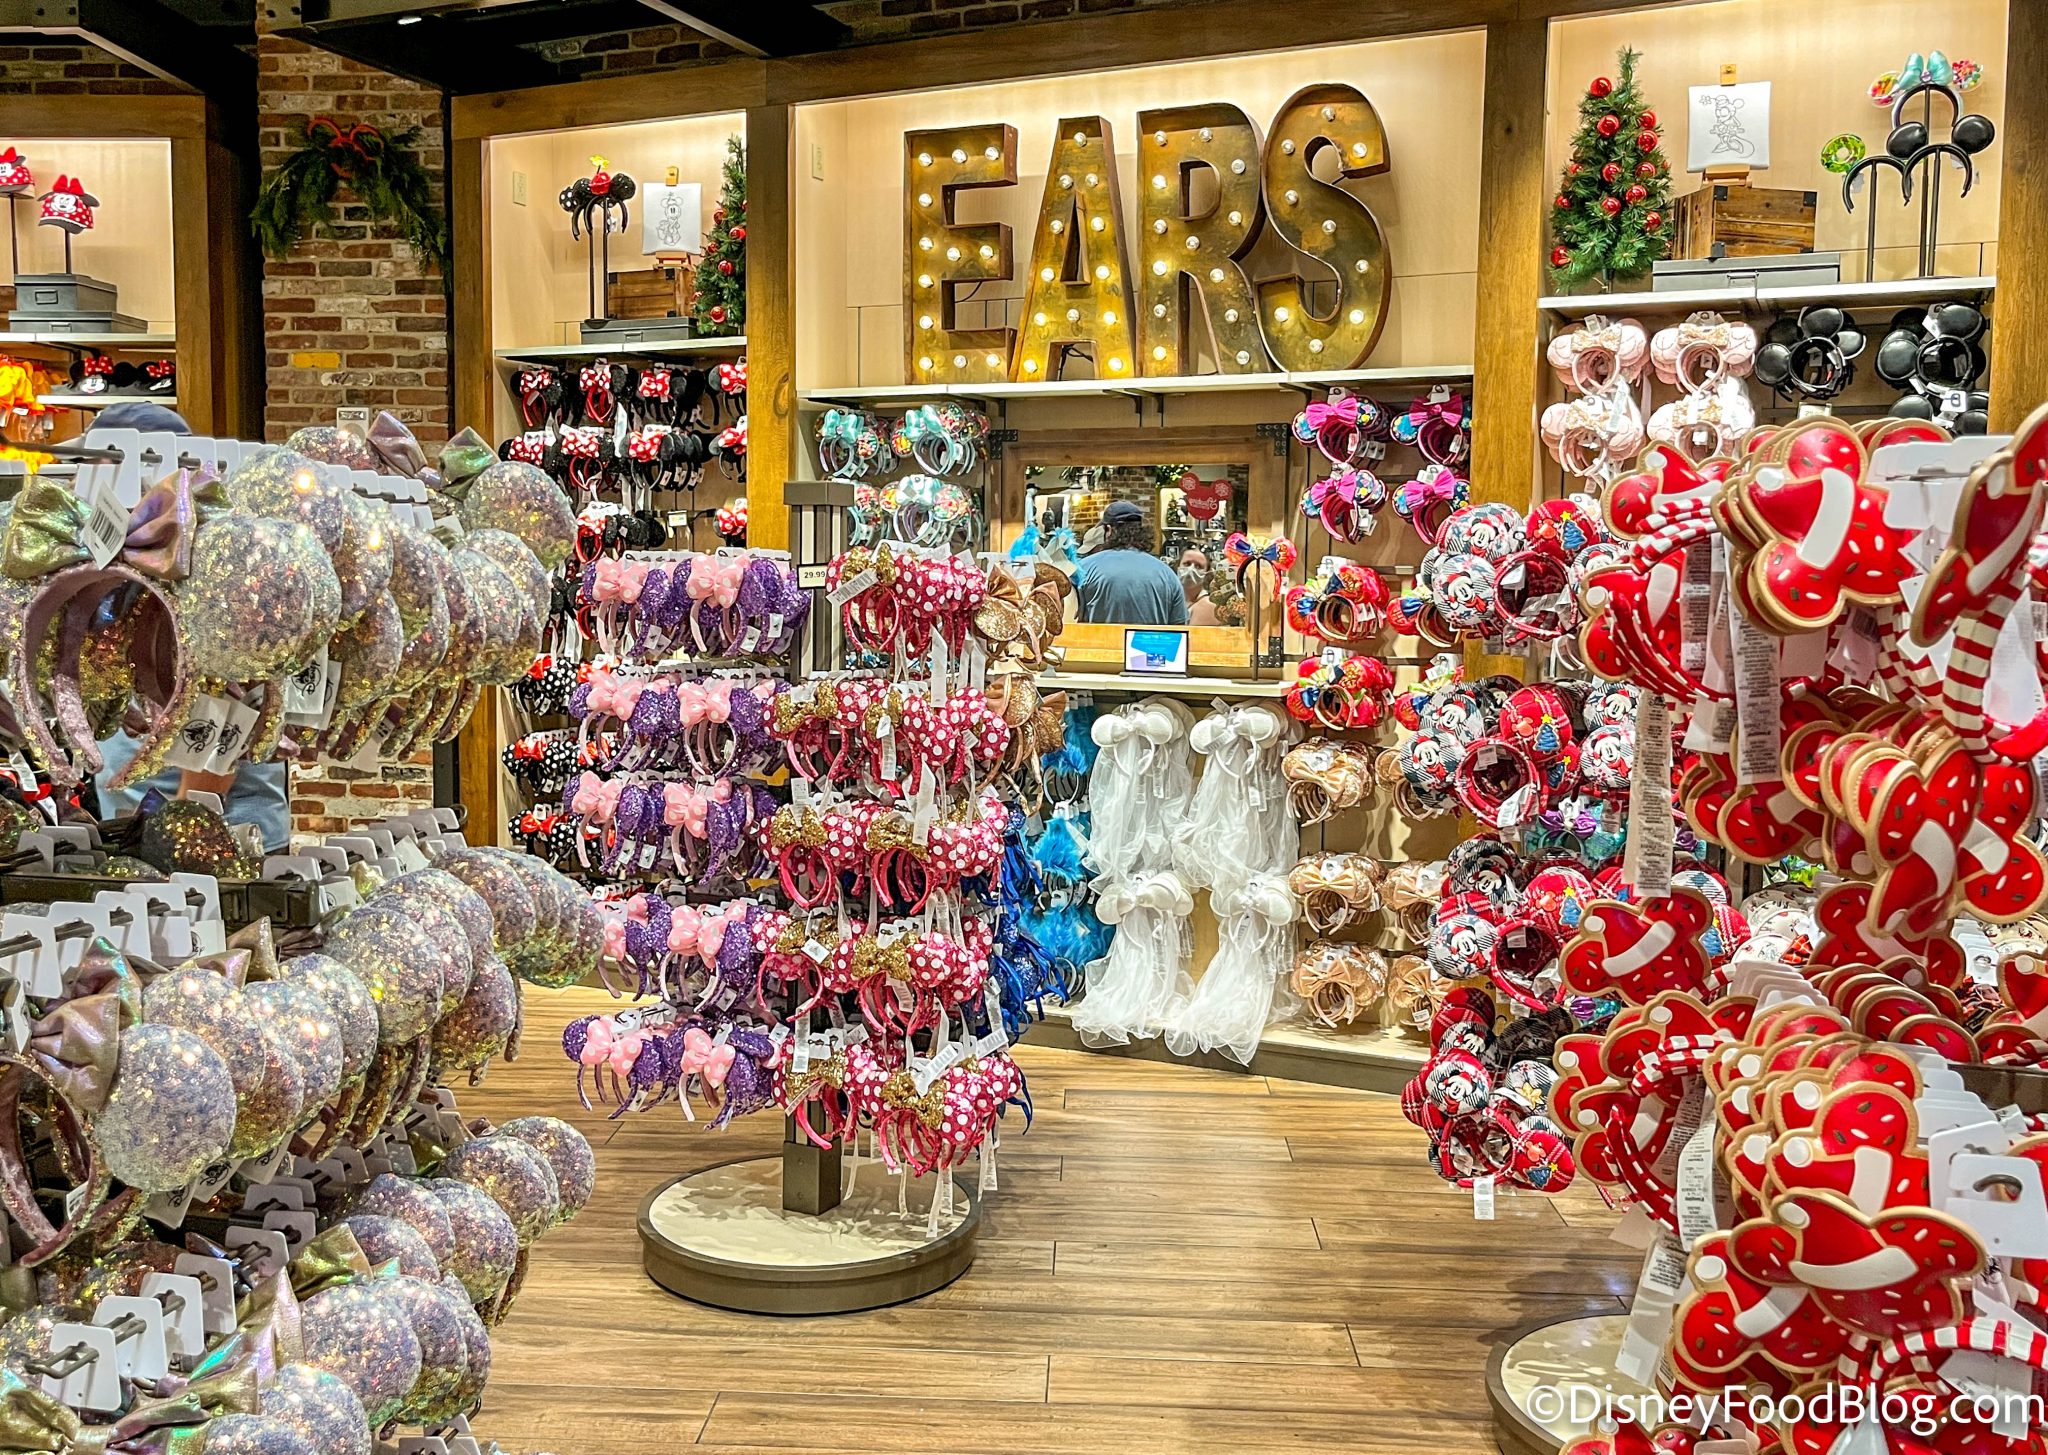 The NEW Belle Ears Have Arrived in Disney World and We’re Still Confused